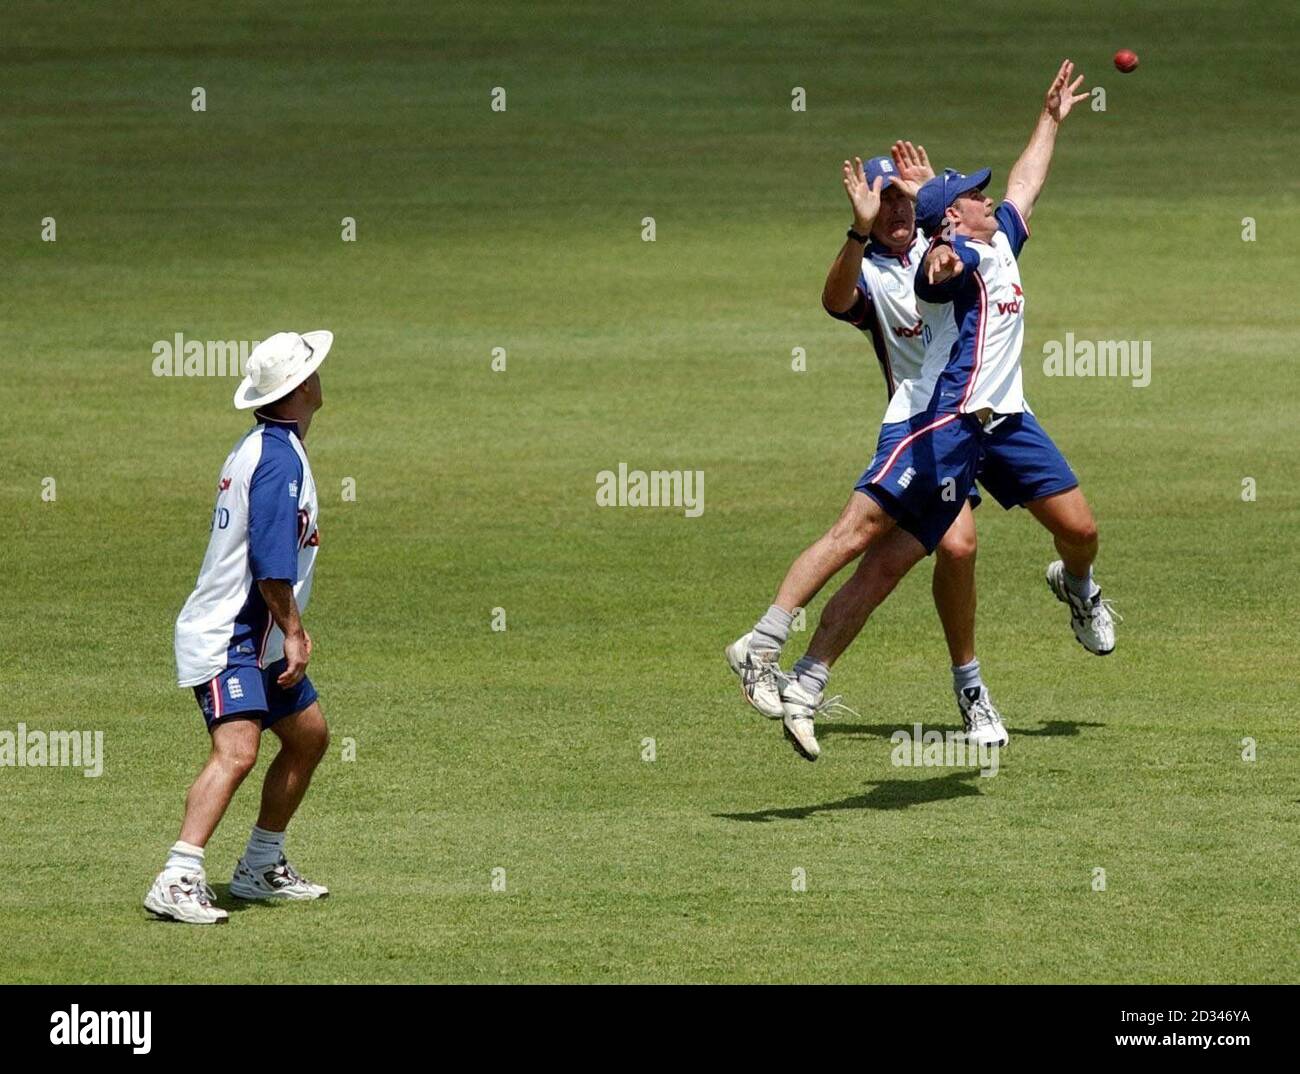 England's Graham Thorpe (left) watches as team-mates Andrew Strauss and Ashley Giles (behind) react for a catch. Stock Photo